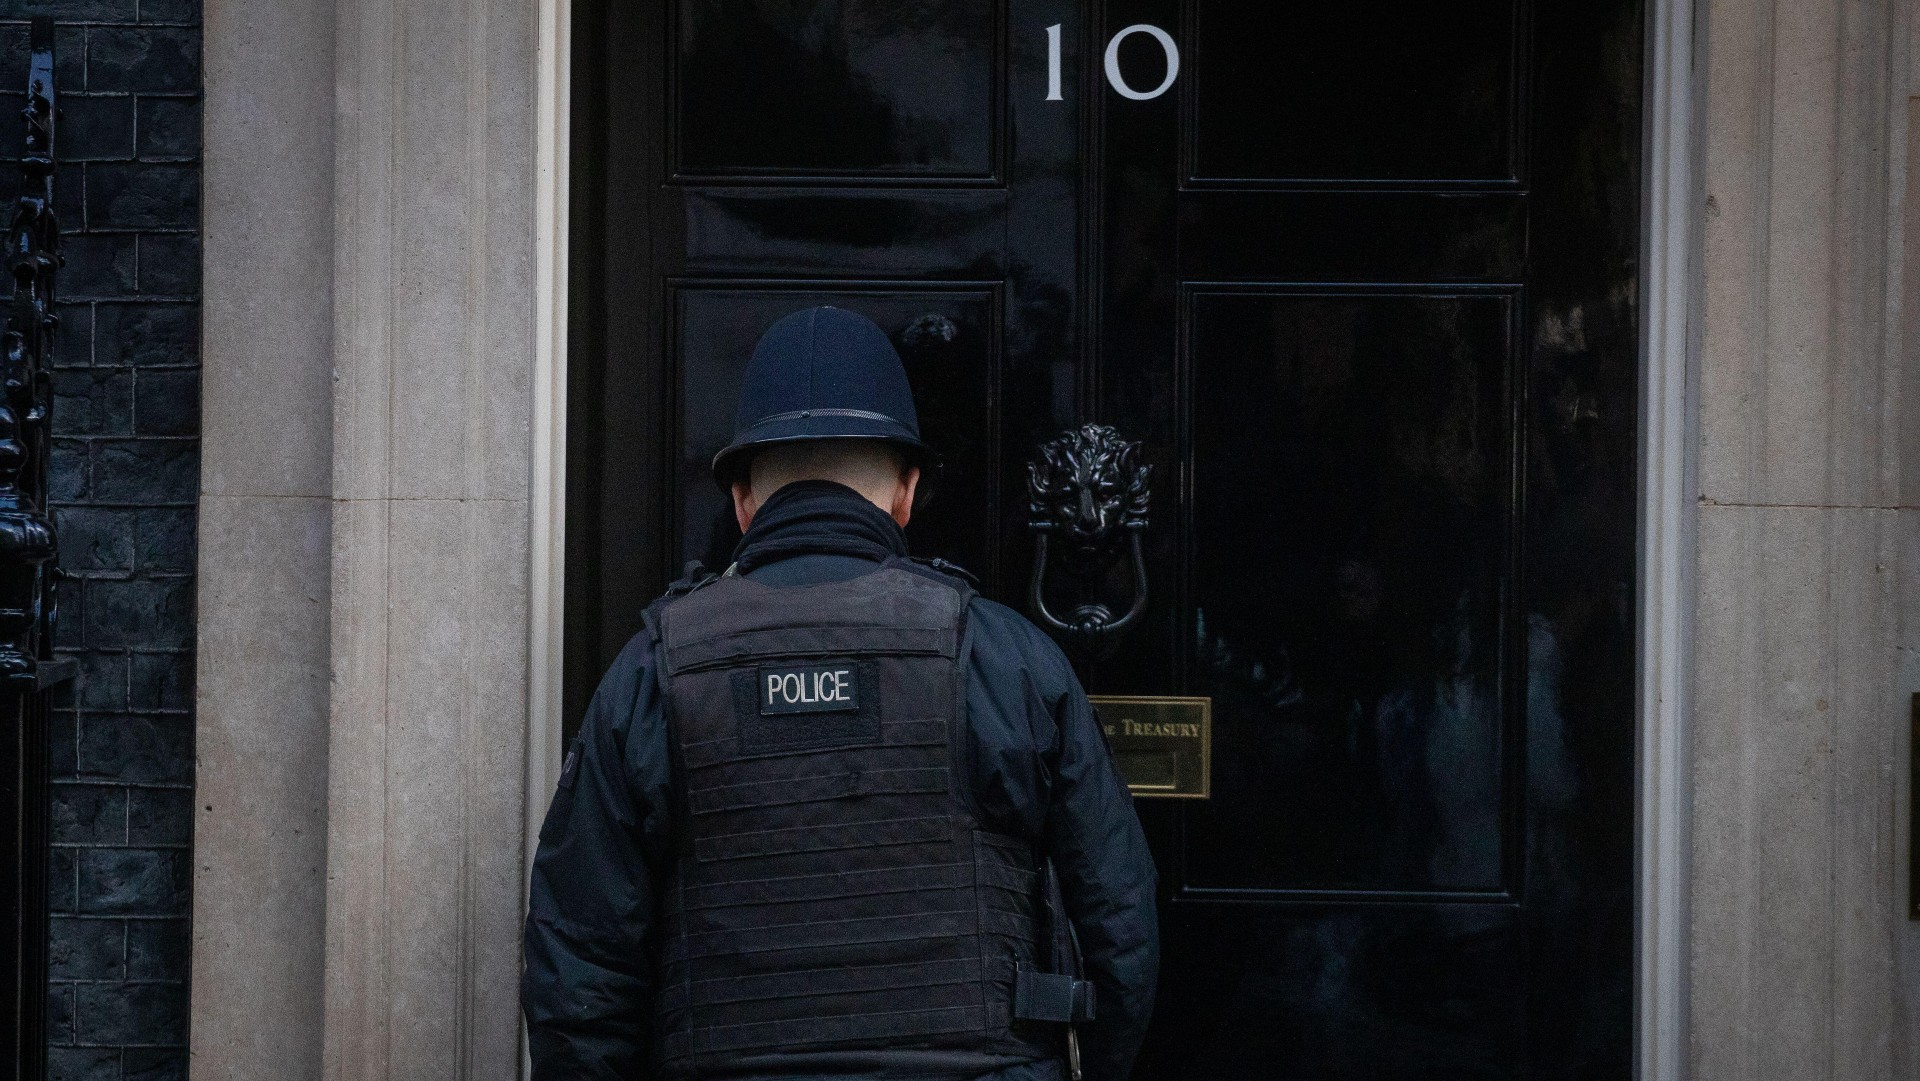 A police officer at the door of No. 10 Downing Street